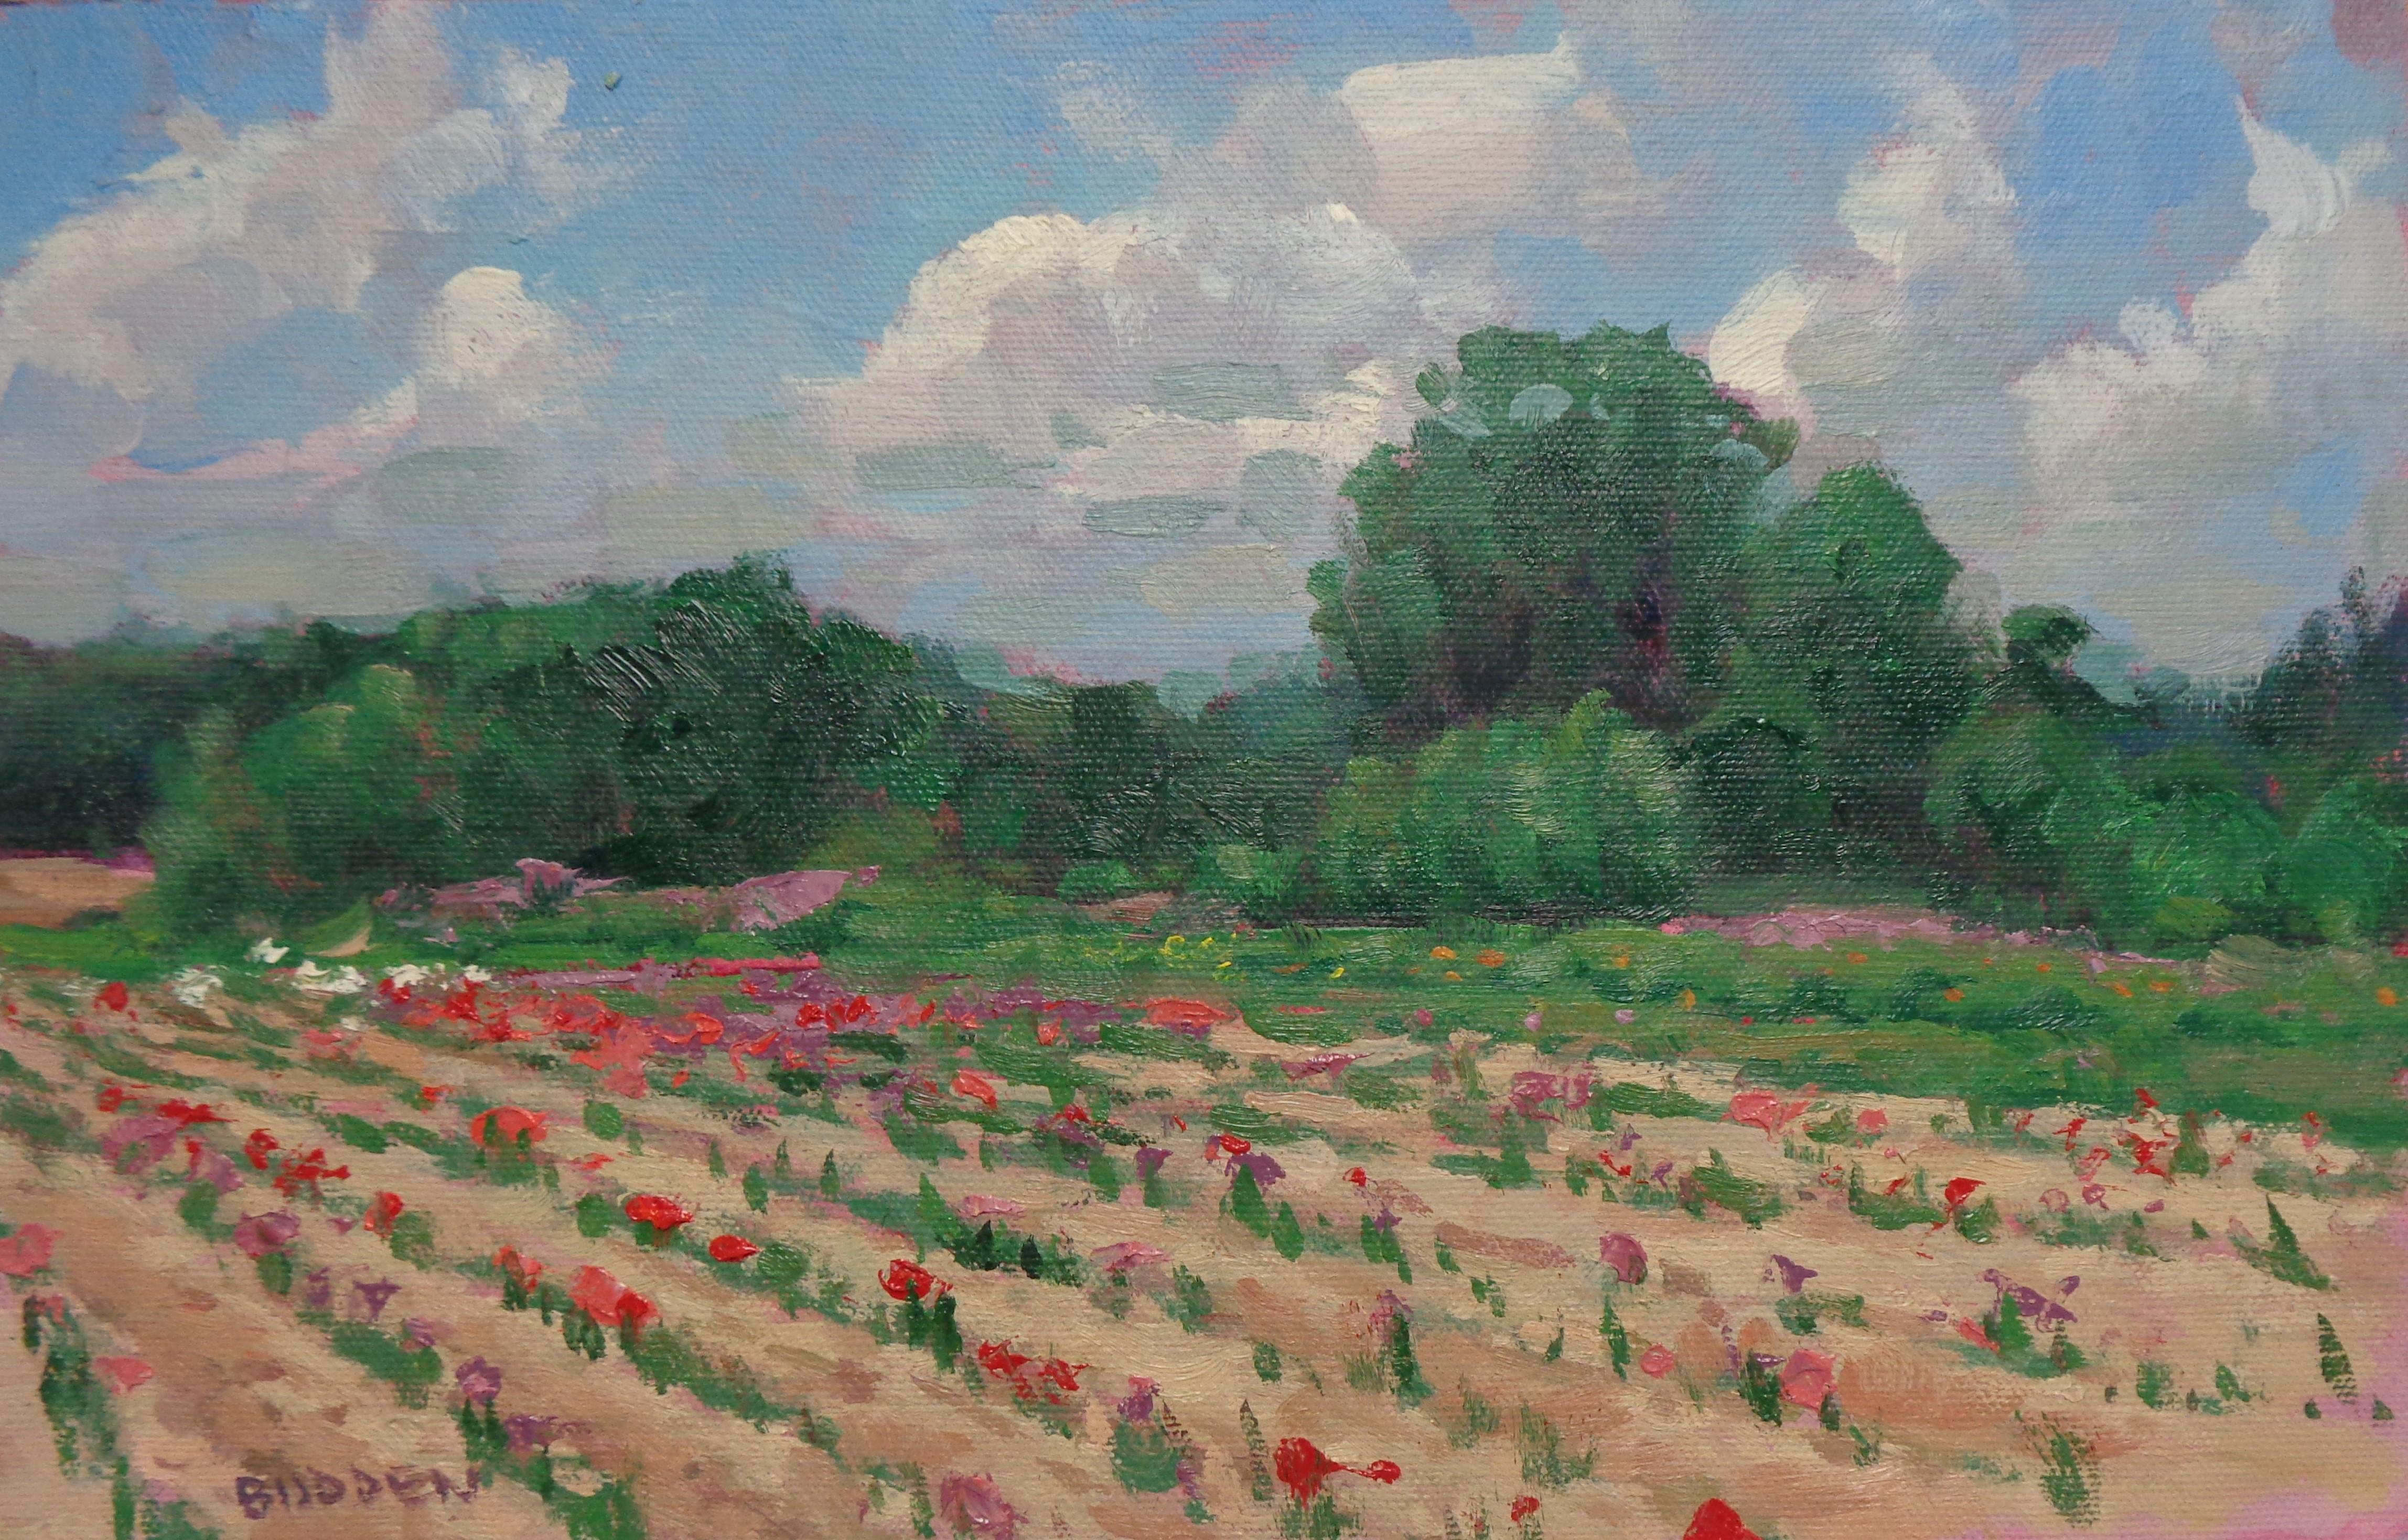 Durr's Flowers is a plein air oil painting on canvas panel that showcases the beautiful light of an early spring day with a view of a flowering field near my studio.  Plein air painting yields a looser brood brush stroke quality to the painting